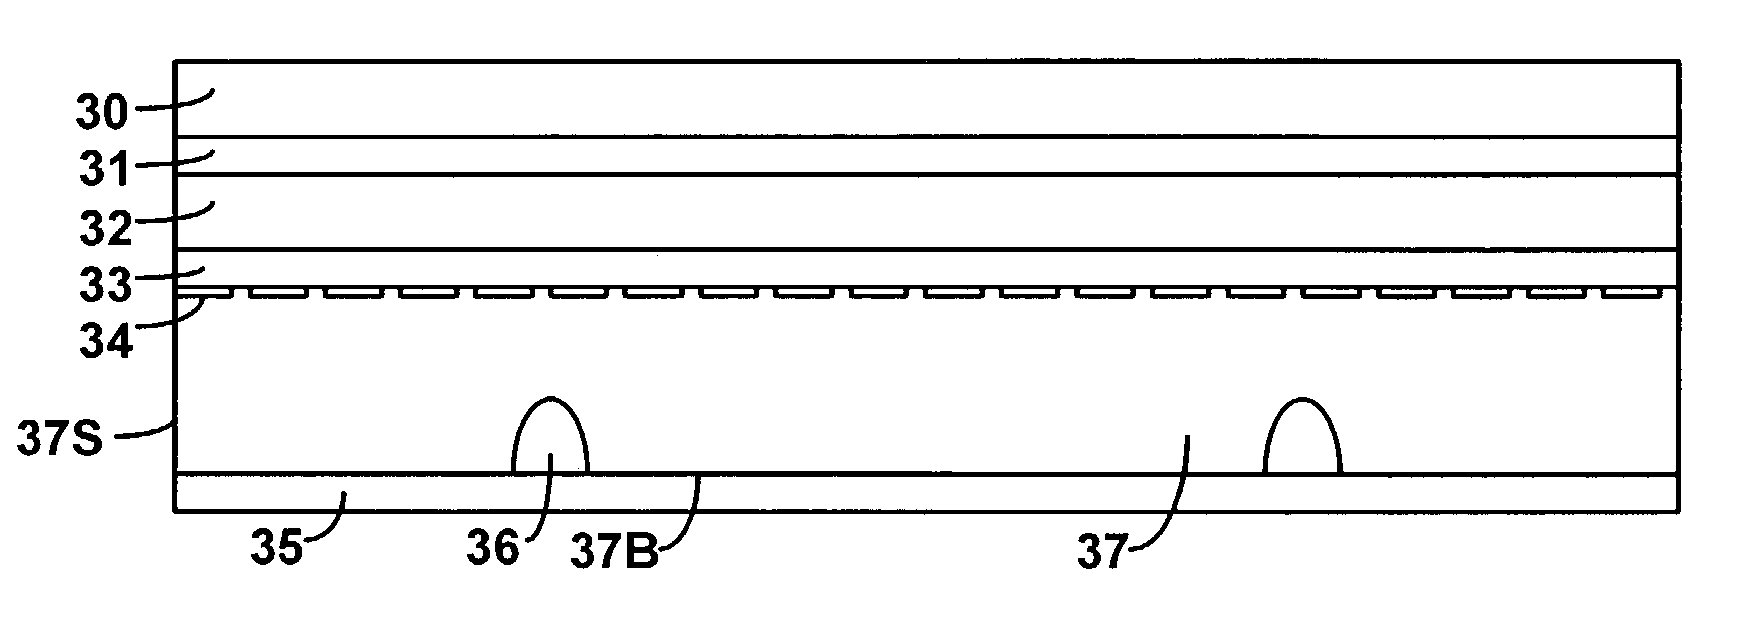 Devices for creating brightness profiles